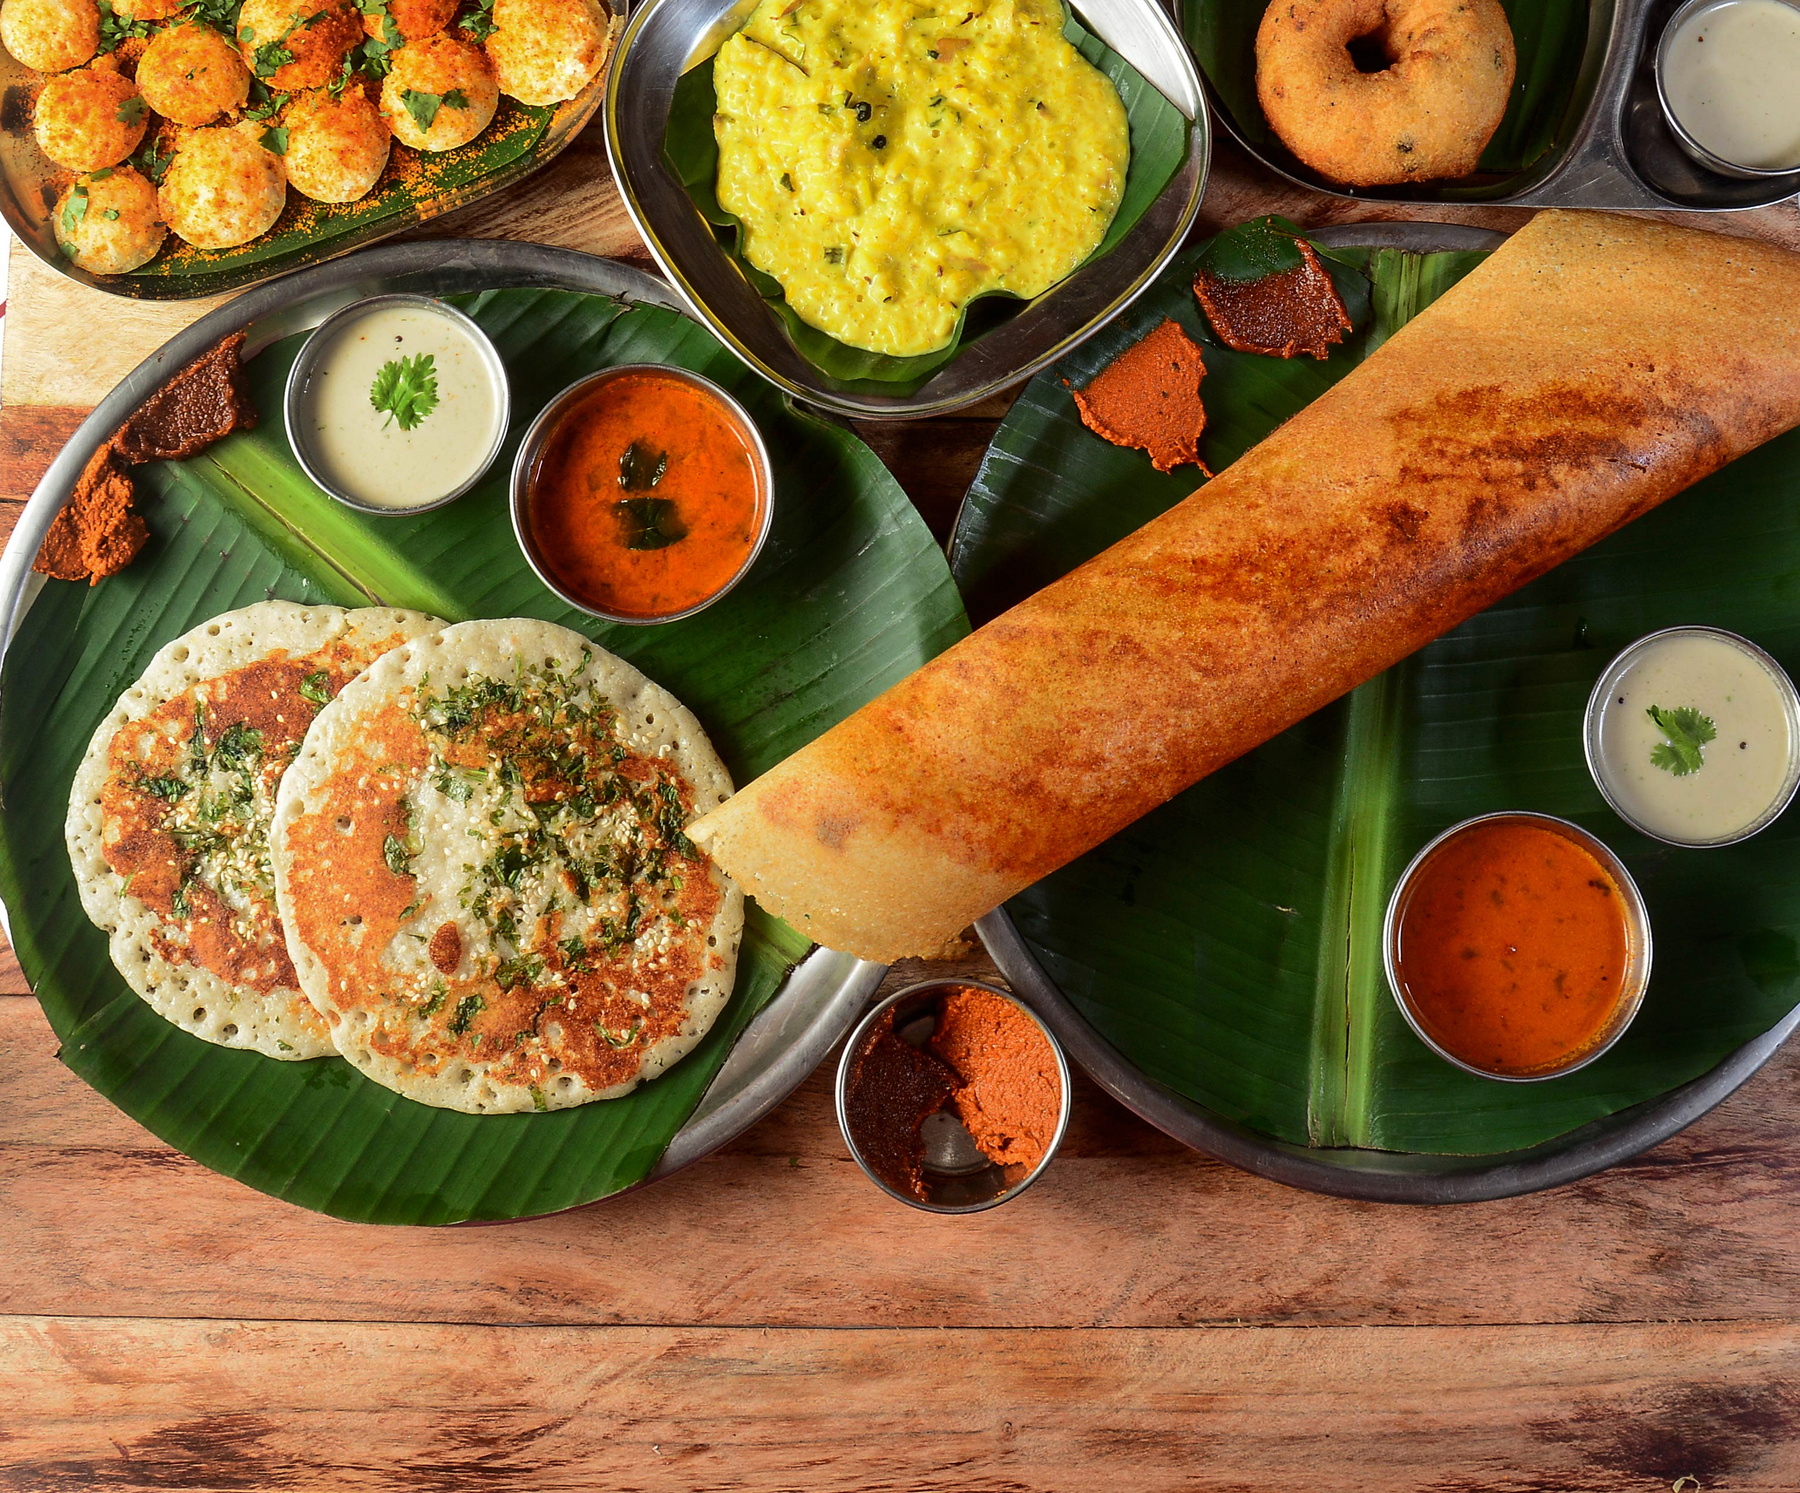 Vibrant display of tempting South Indian dishes - a feast for the senses